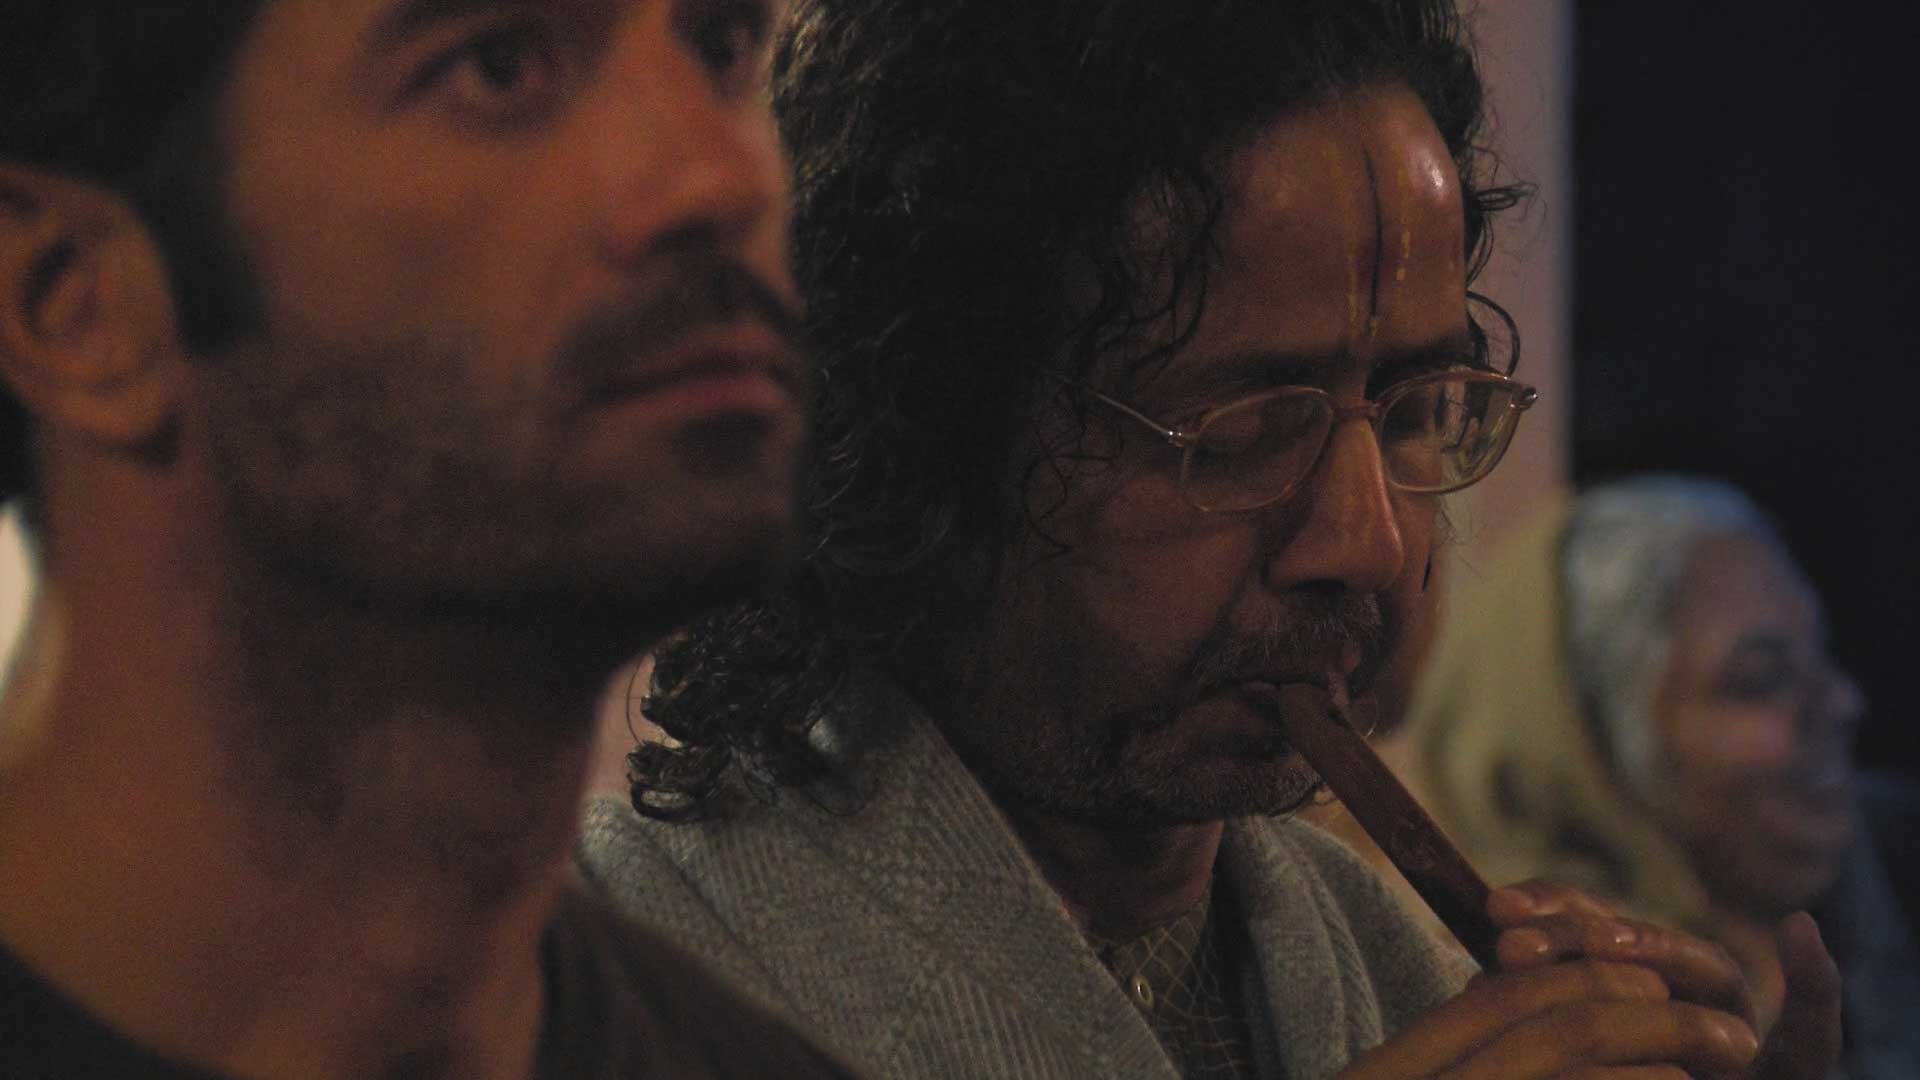 Dinesh Goswami Plays Flute at Radha Raman temple, a still from a multi-award winning 'Reconnection' film.